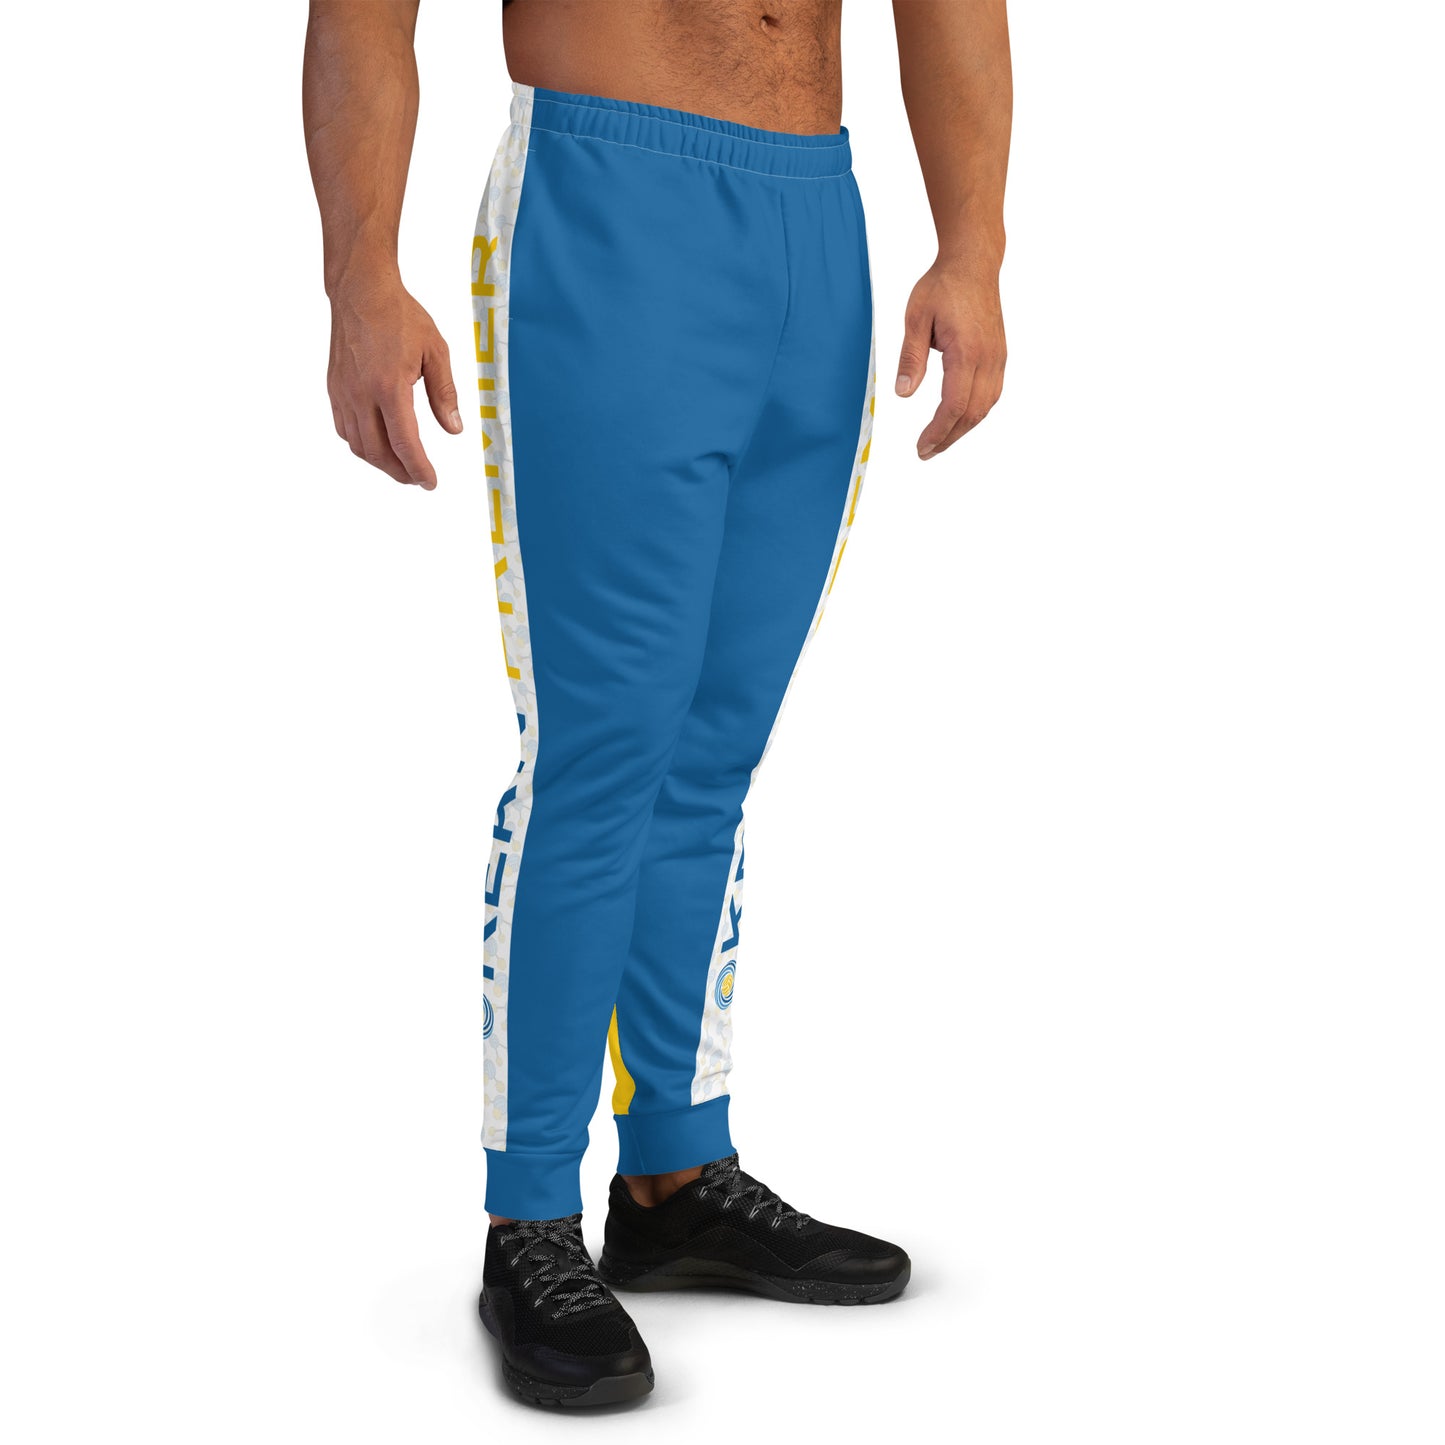 Kern Premier - Blue and Gold with H20 Waterpolo Molecule Stripe and Logo - Joggers